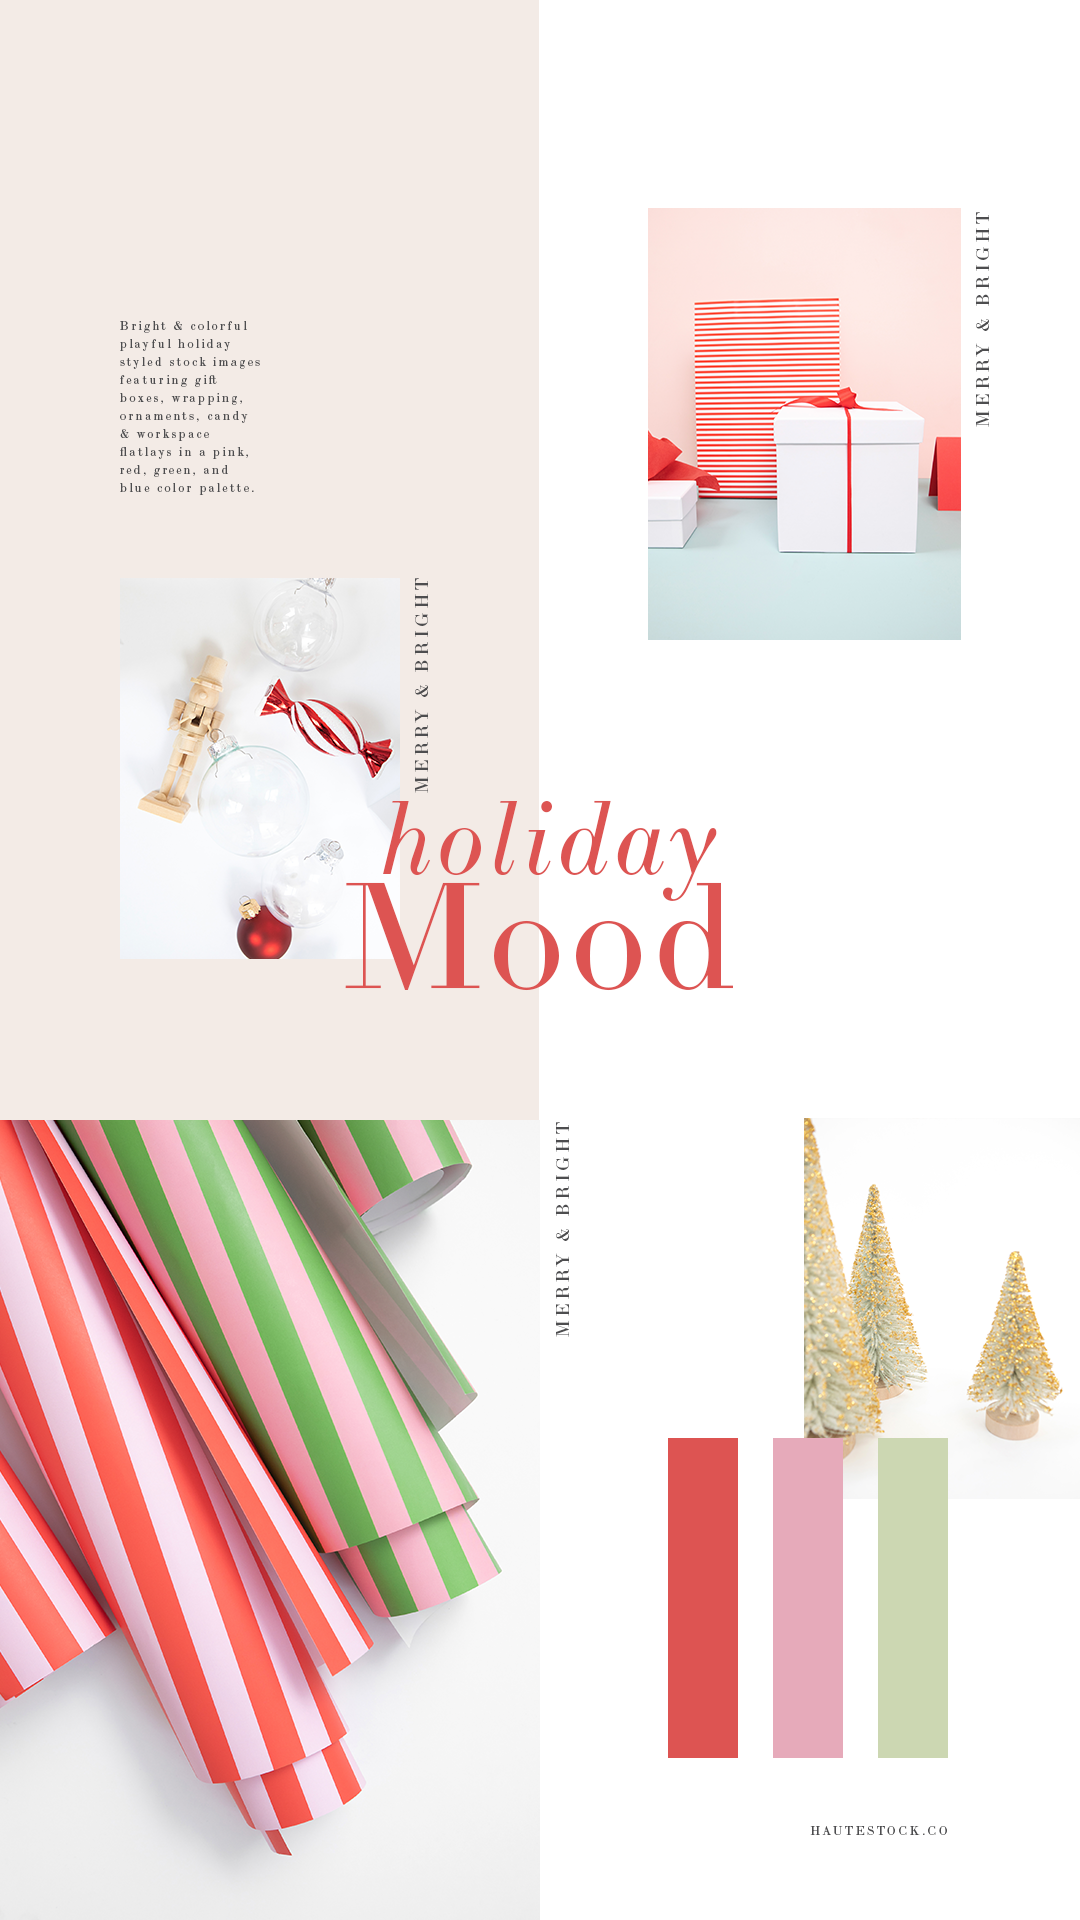 Bright & colorful playful holiday styled stock images featuring gift boxes, wrapping, ornaments, candy & workspace flatlays in a pink, red, green and blue color palette.